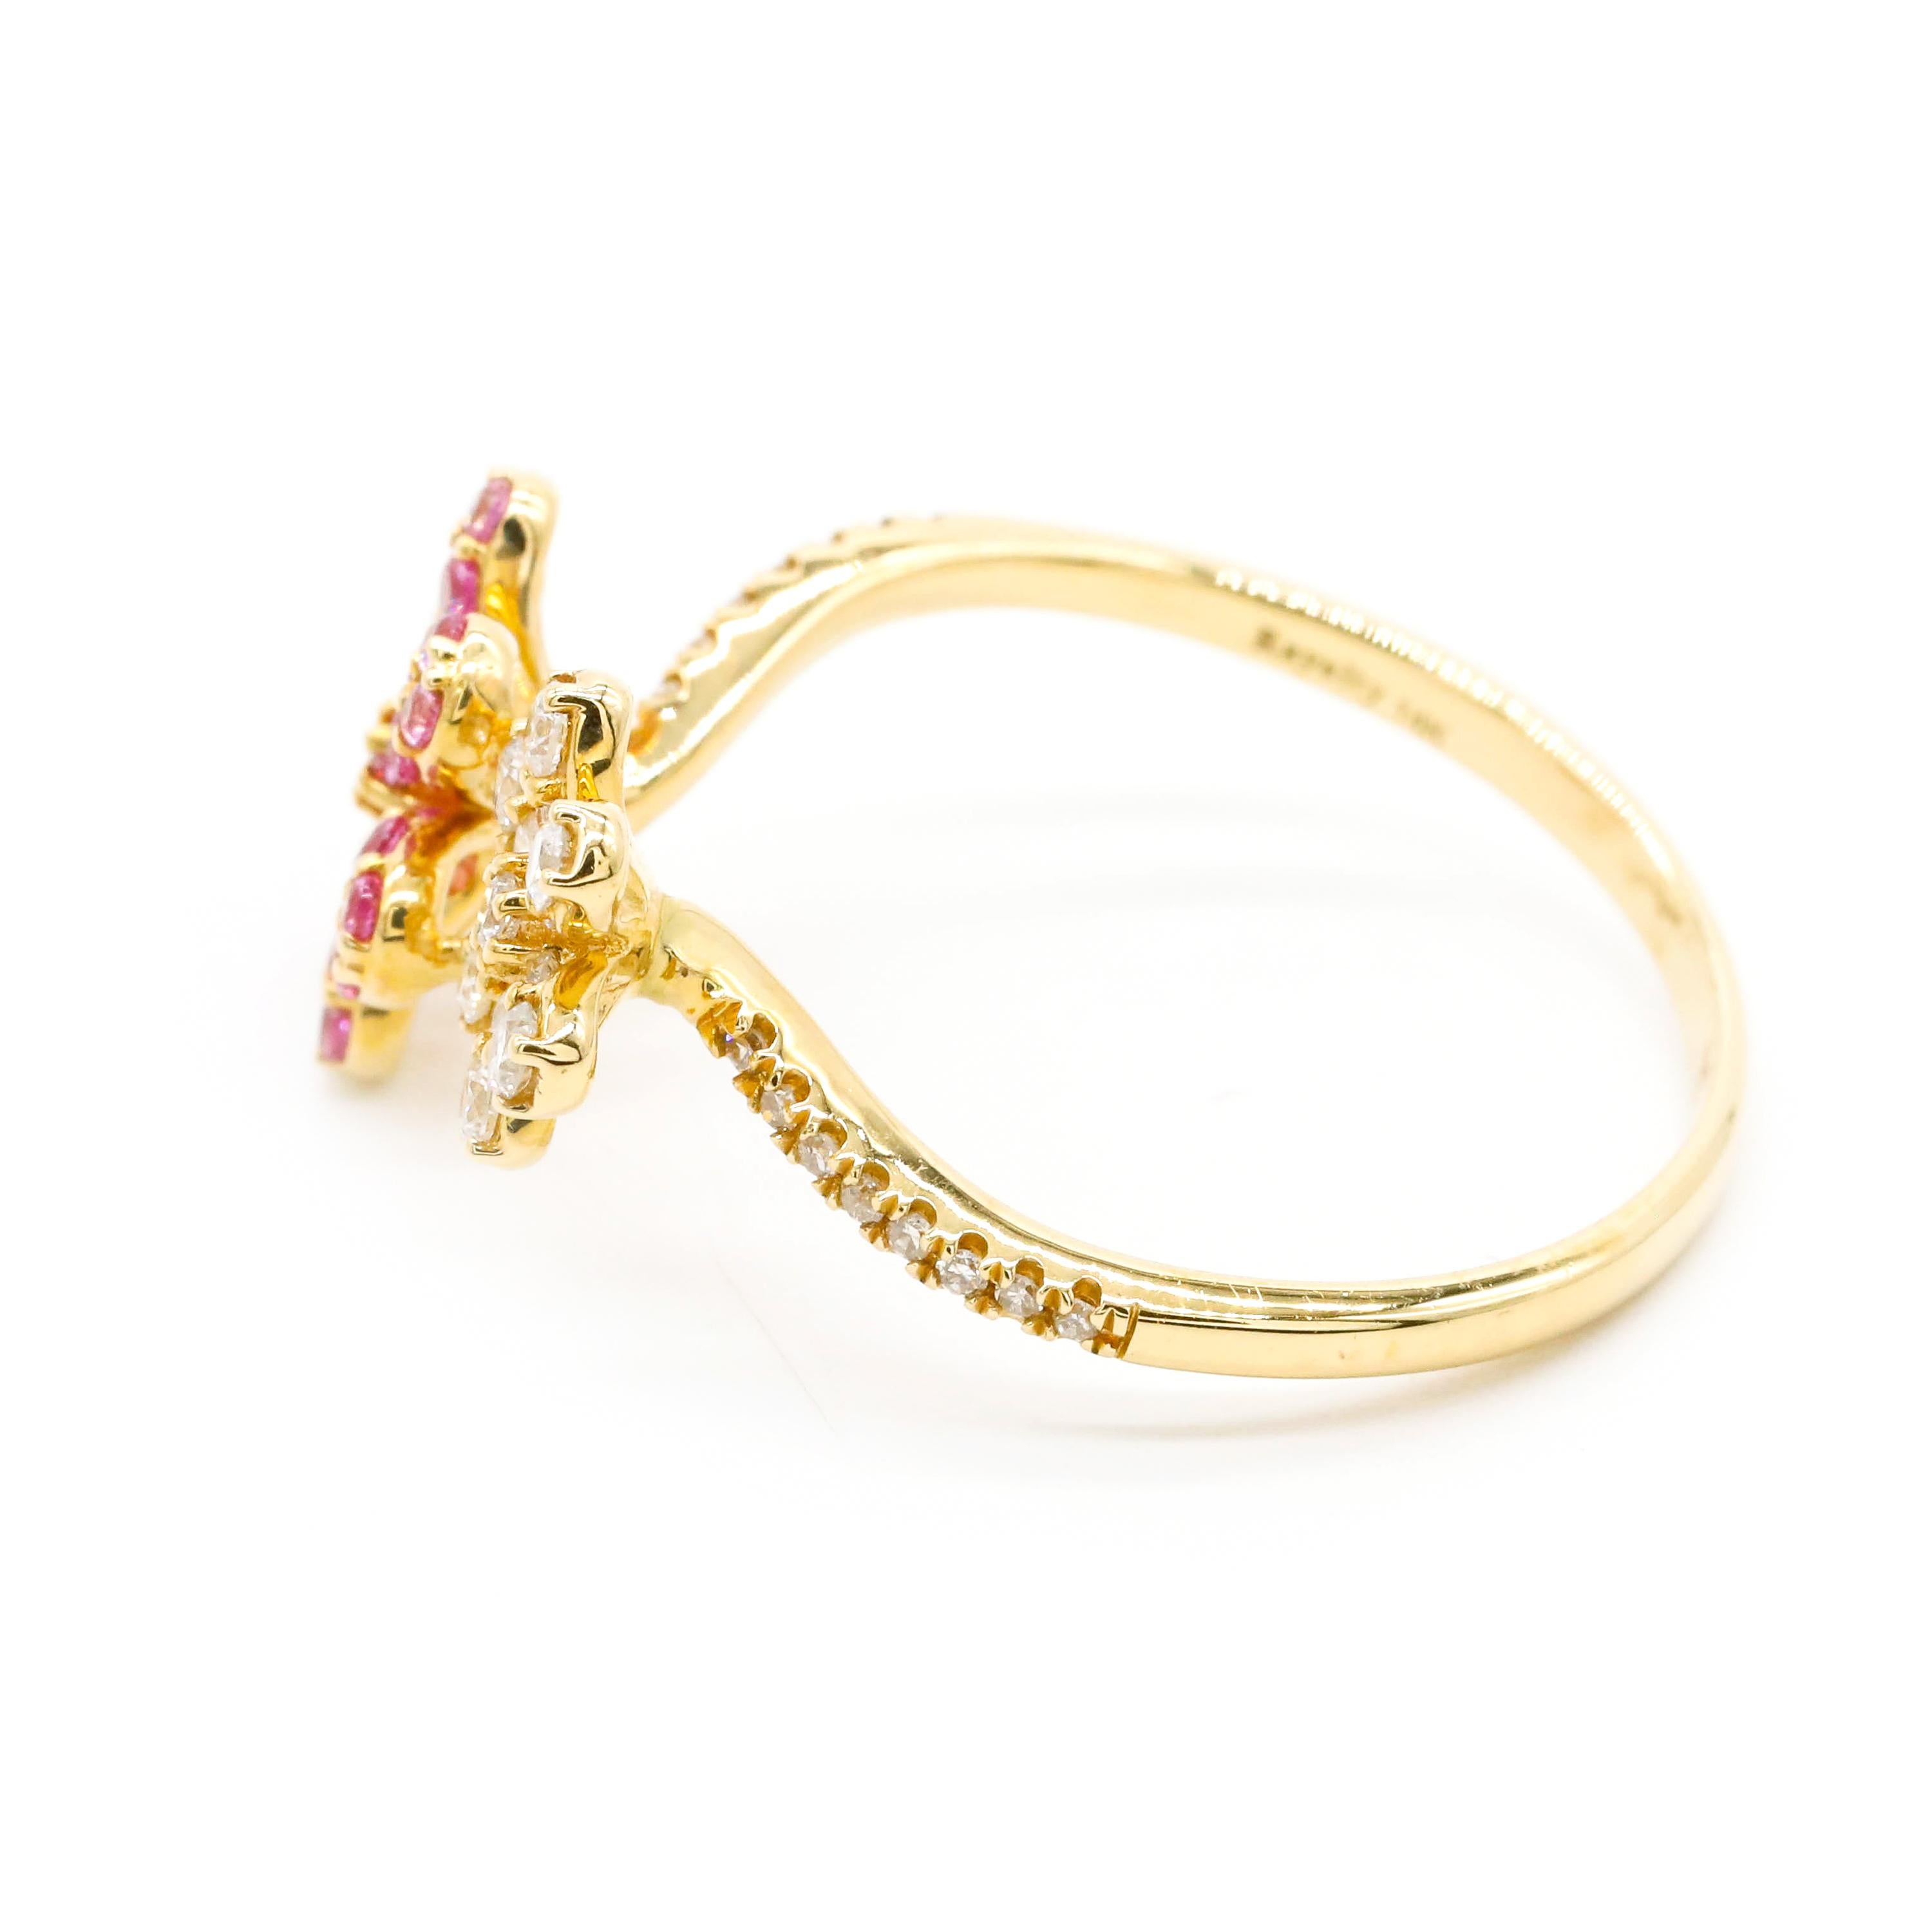 0.23 Carat Diamond Pink Sapphire Pave Daisy Flower 14K Yellow Gold Wrap Ring

This modern ring features a total of 0.23 carats of diamond round shape and 0.47 carats Pink Sapphire Gemstone Set in 14K Yellow Gold.

We guarantee all products sold and